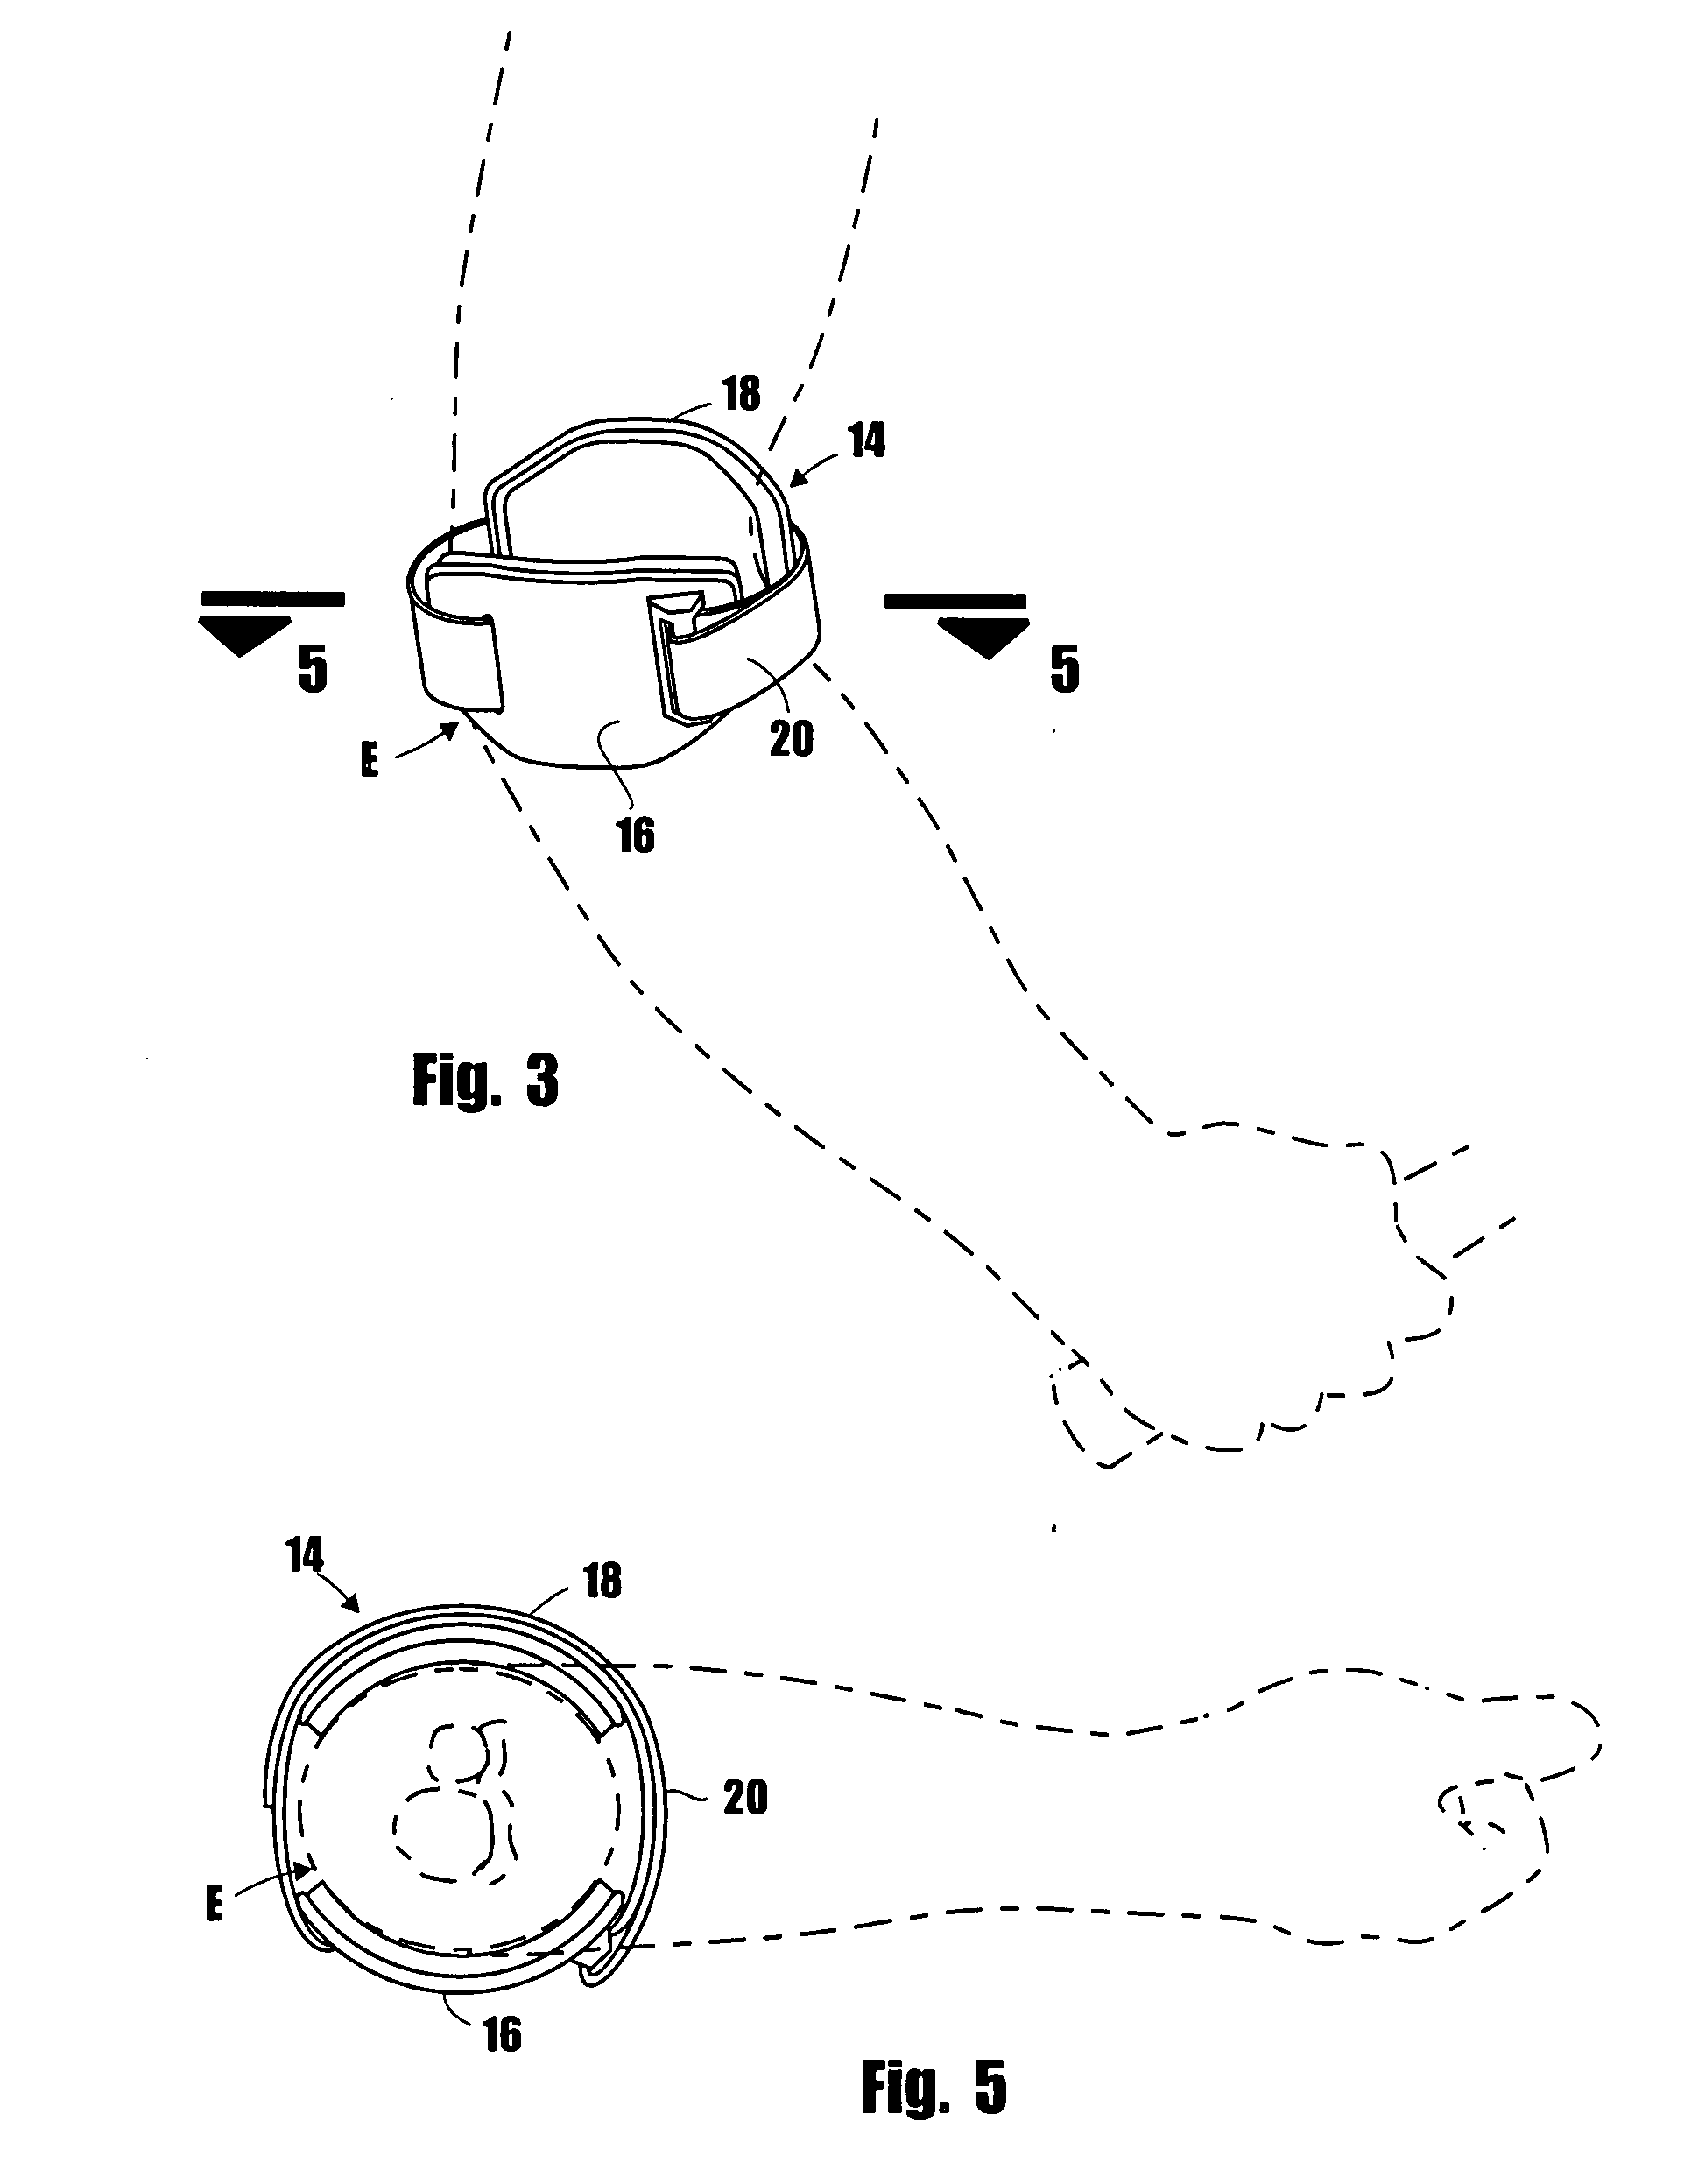 Apparatus for the treatment of arm disorders and the methods of using same